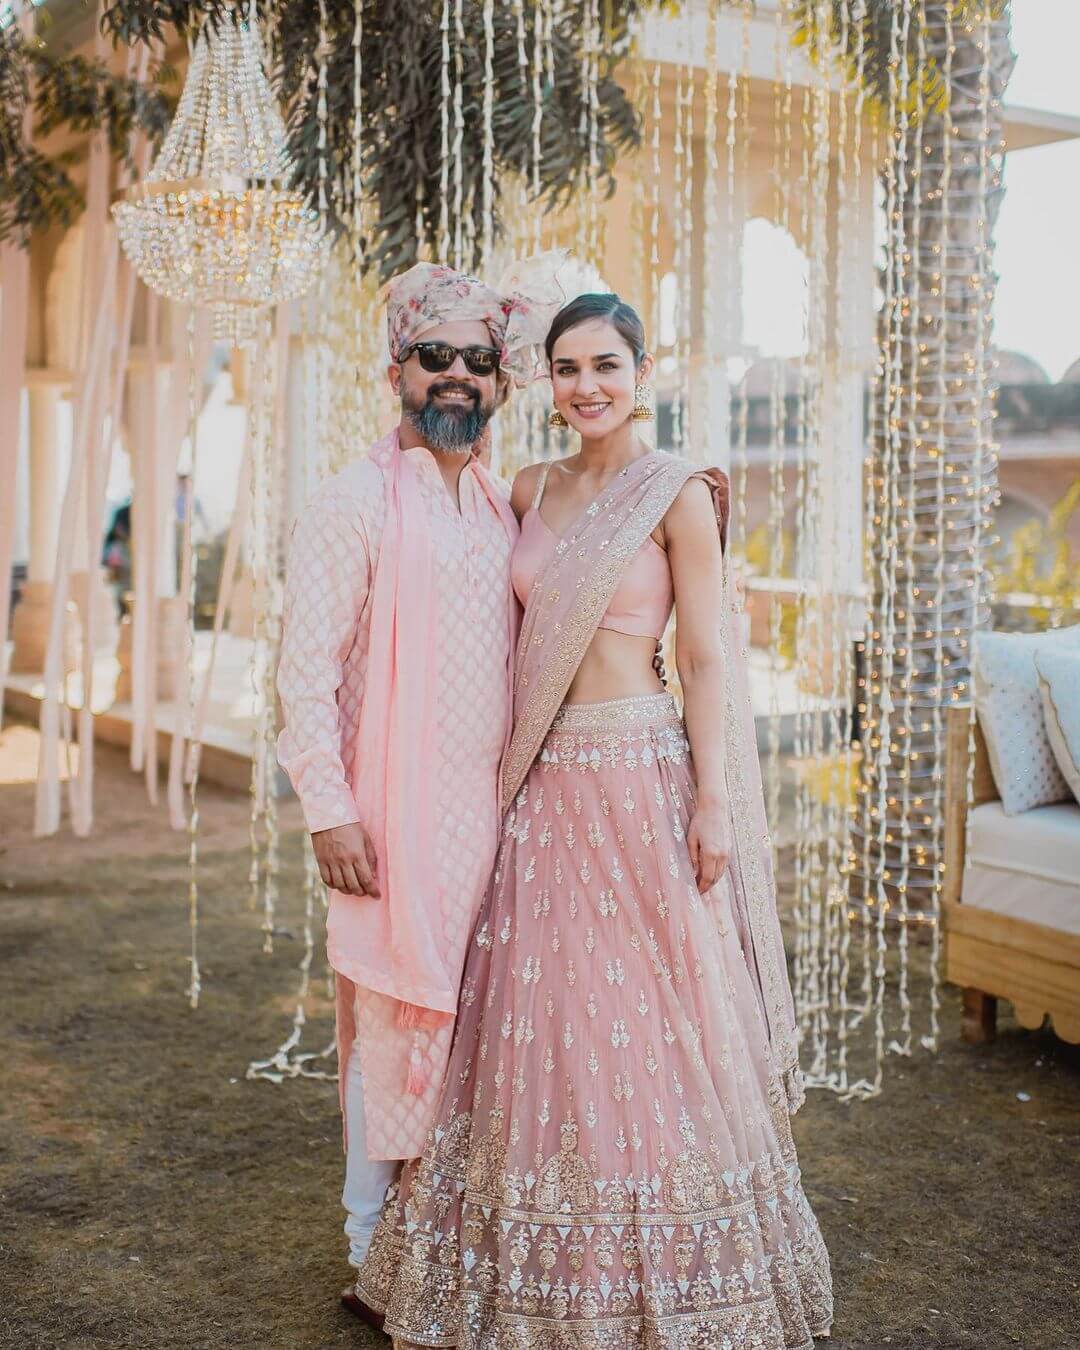 Effortless Elegance: Angira Dhar and Her Husband Wish Viewers a Happy New Year in Twin Pastel Pink Outfits